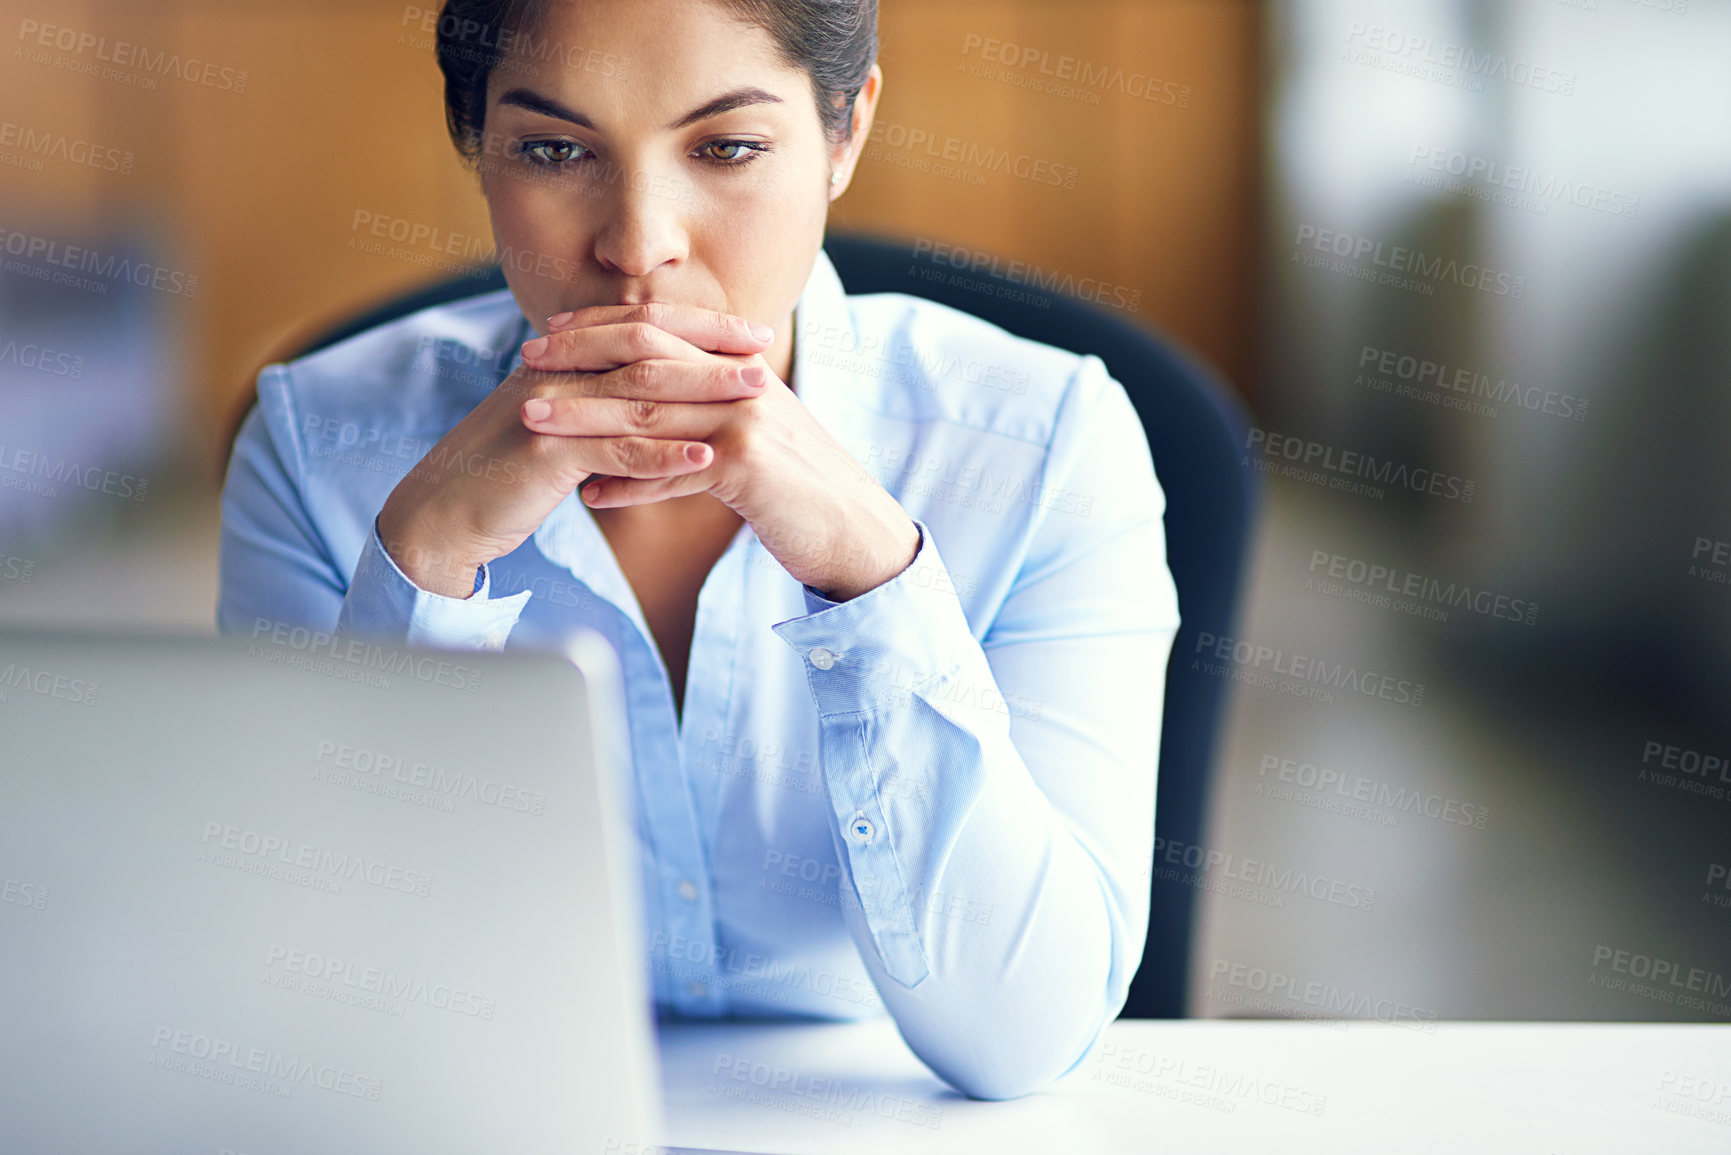 Buy stock photo Shot of a young businesswoman looking stressed while working at her desk